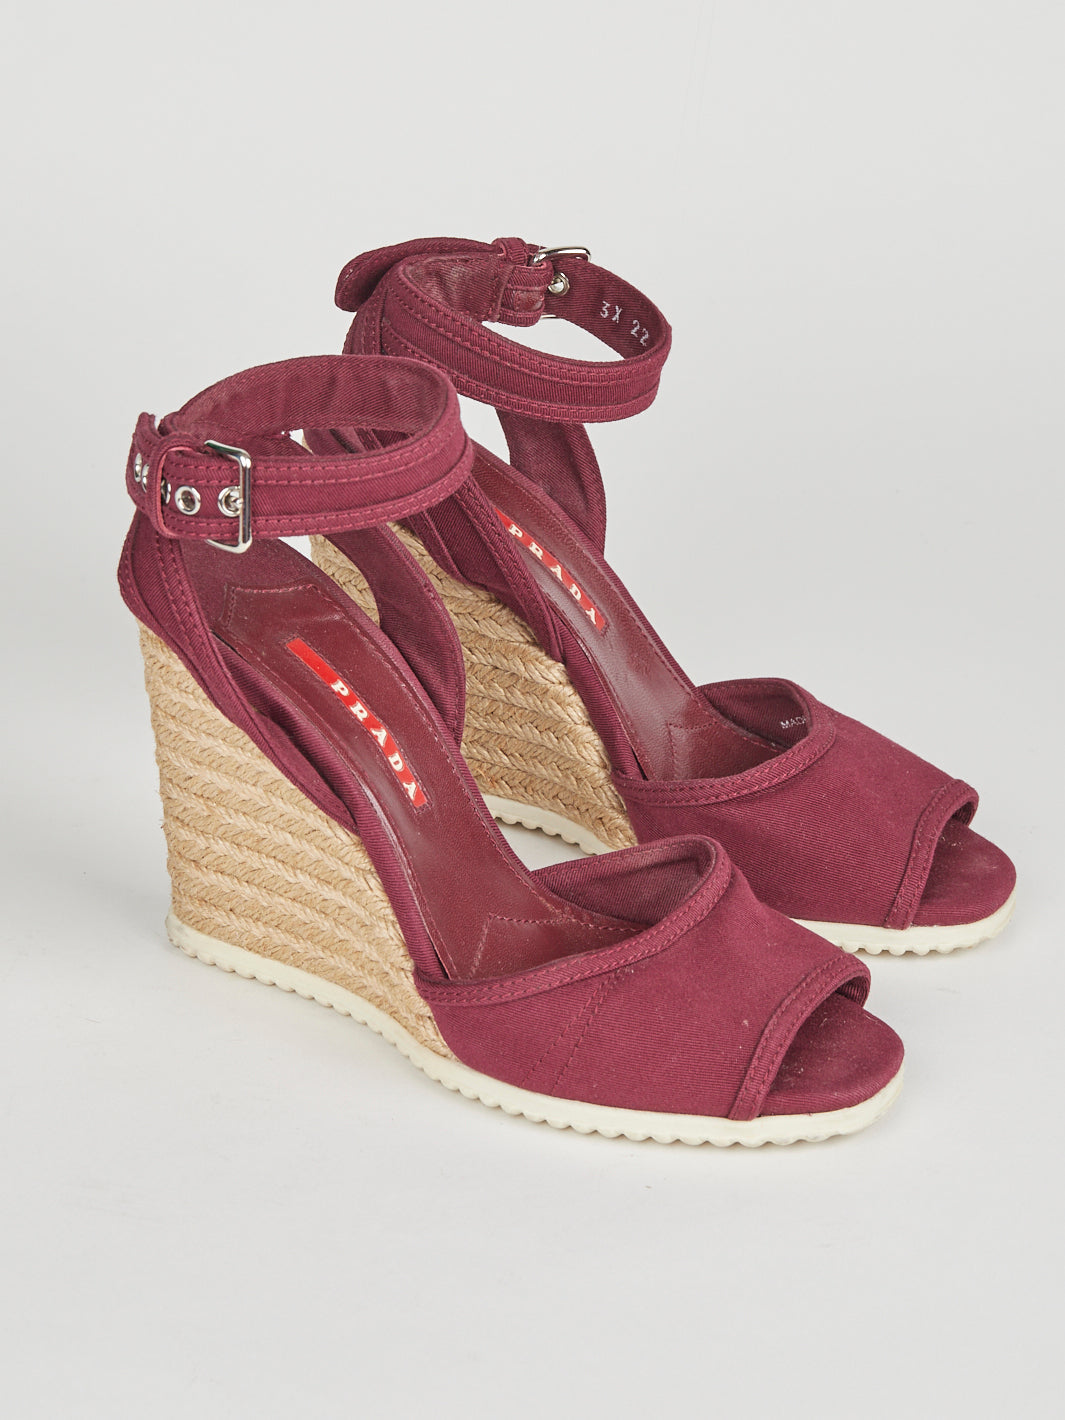 2010 Prada espadrilles in burgundy-colored open toe canvas with wedge